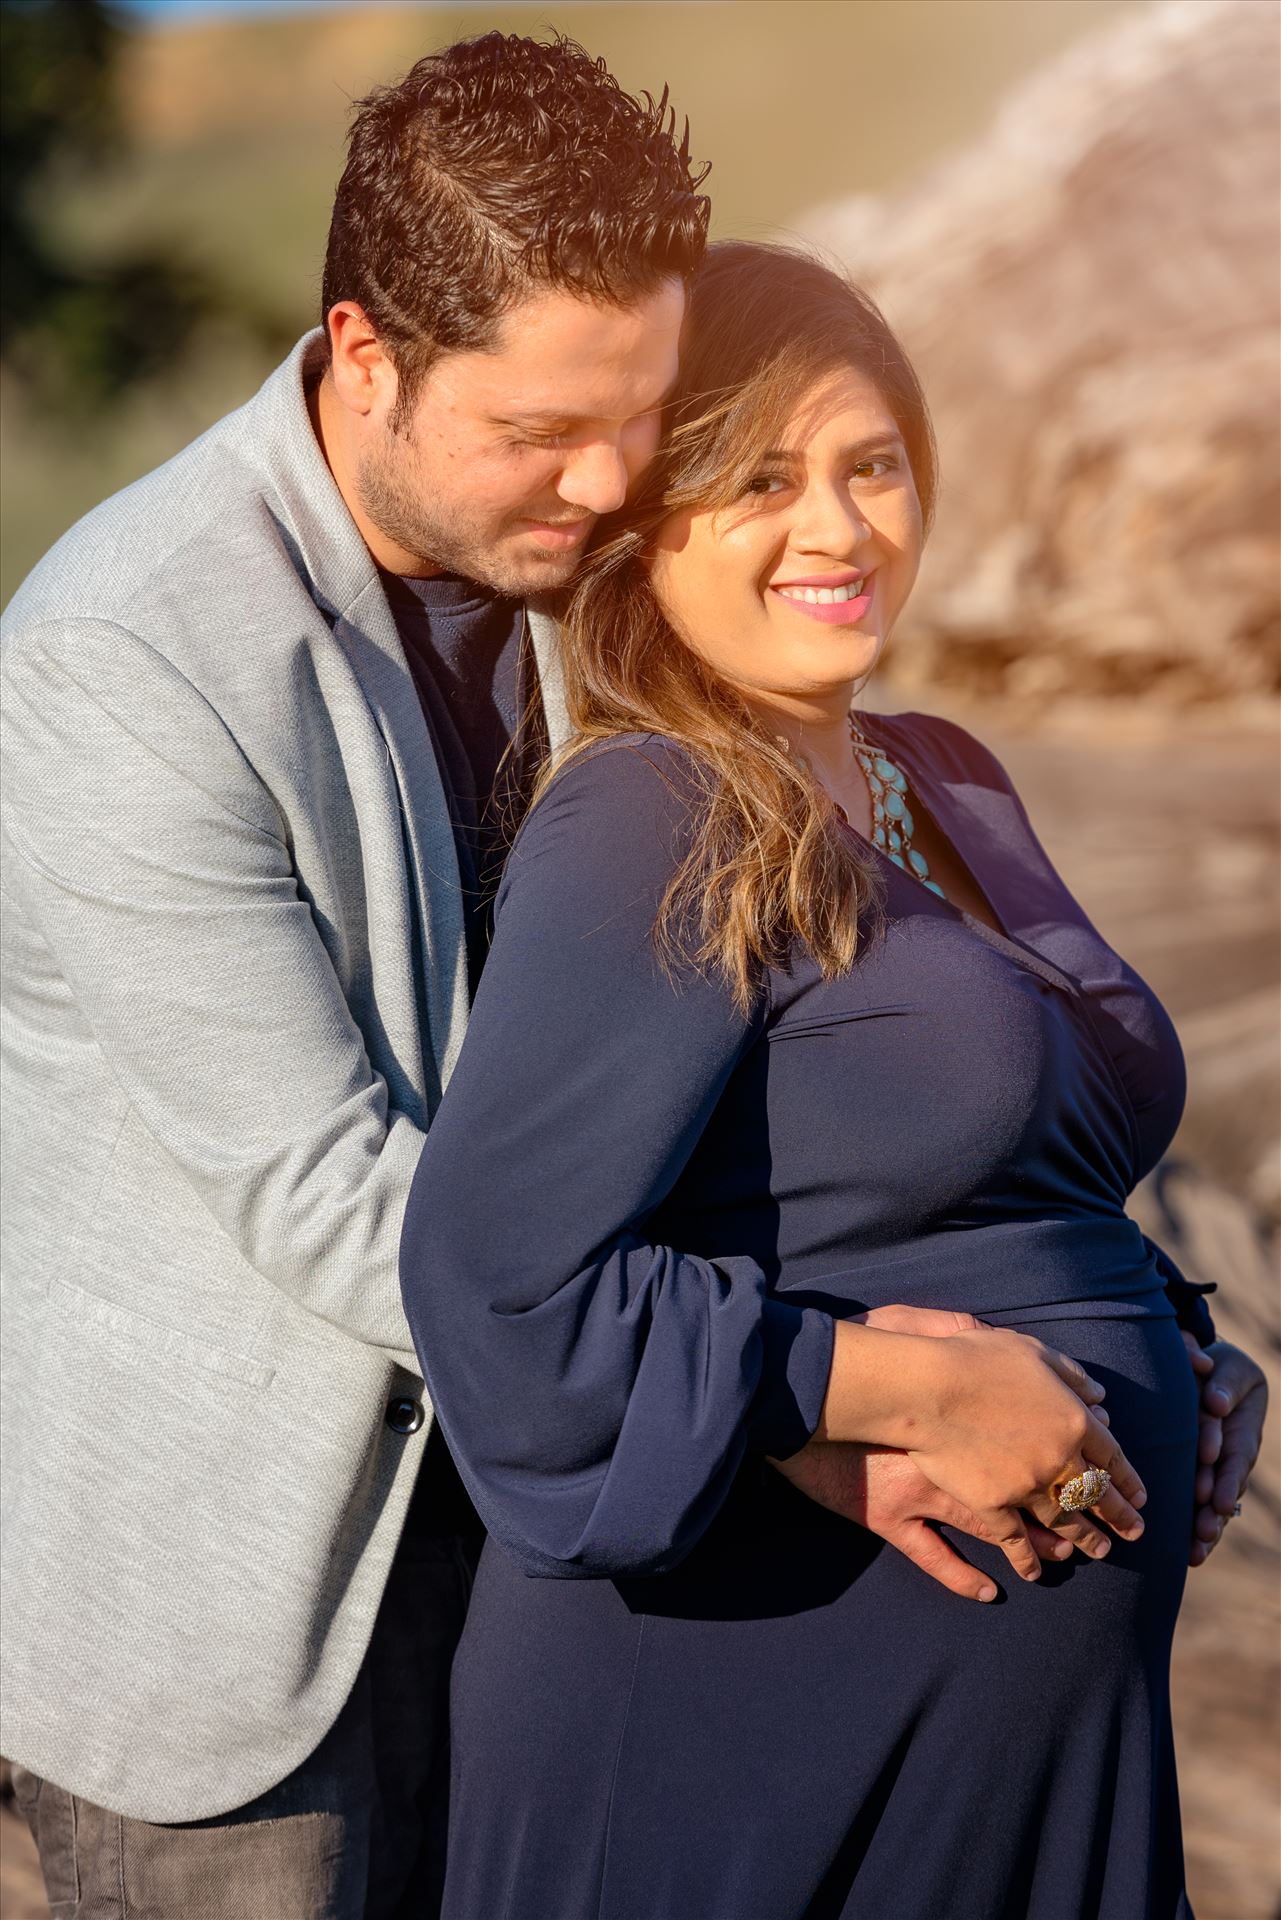 Siddiki Maternity Session 09  by Sarah Williams